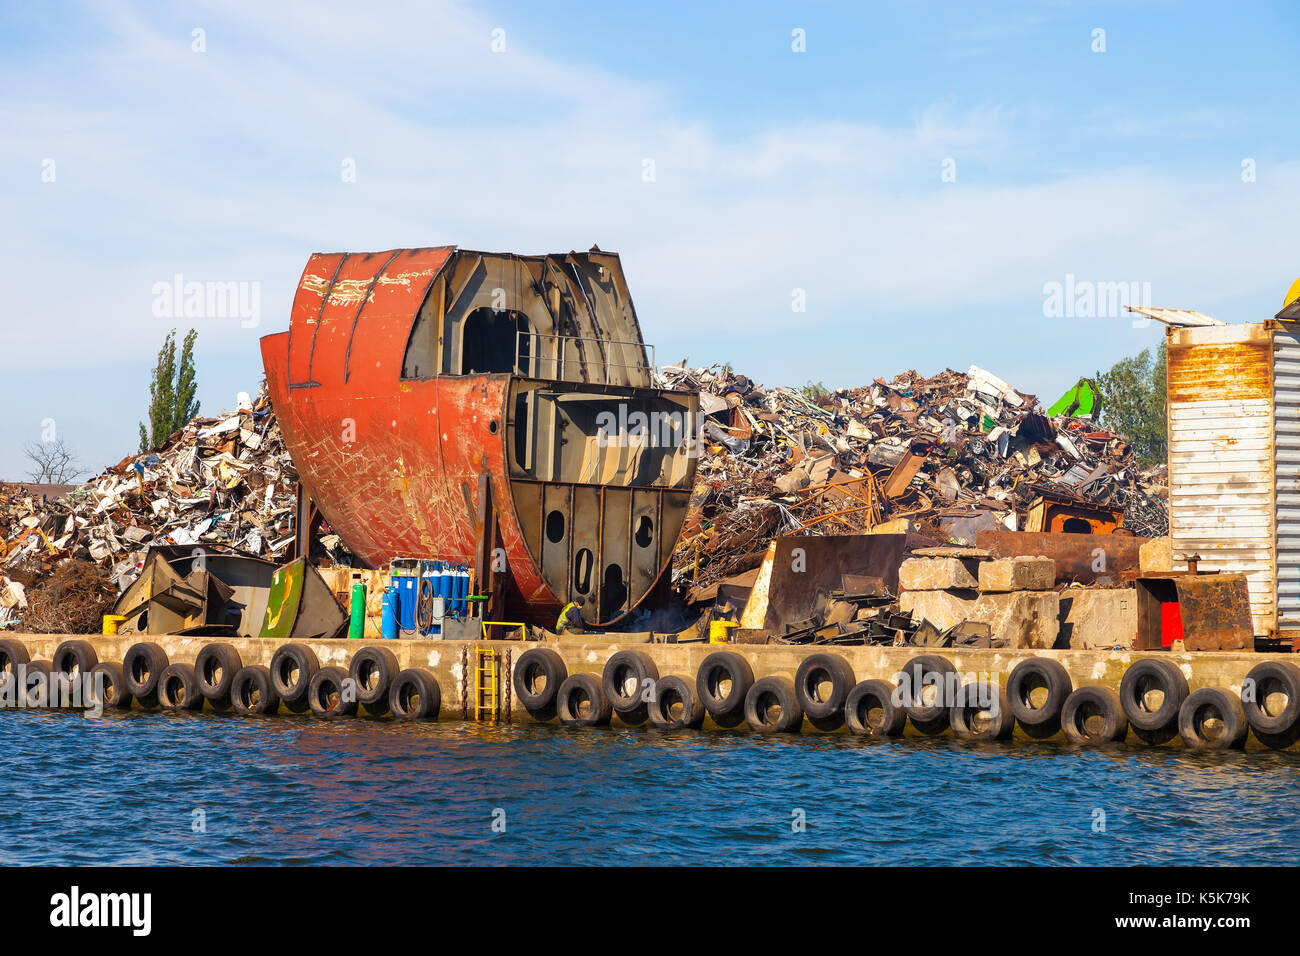 Dismantling the ship on scrap metal ready for recycling. Stock Photo